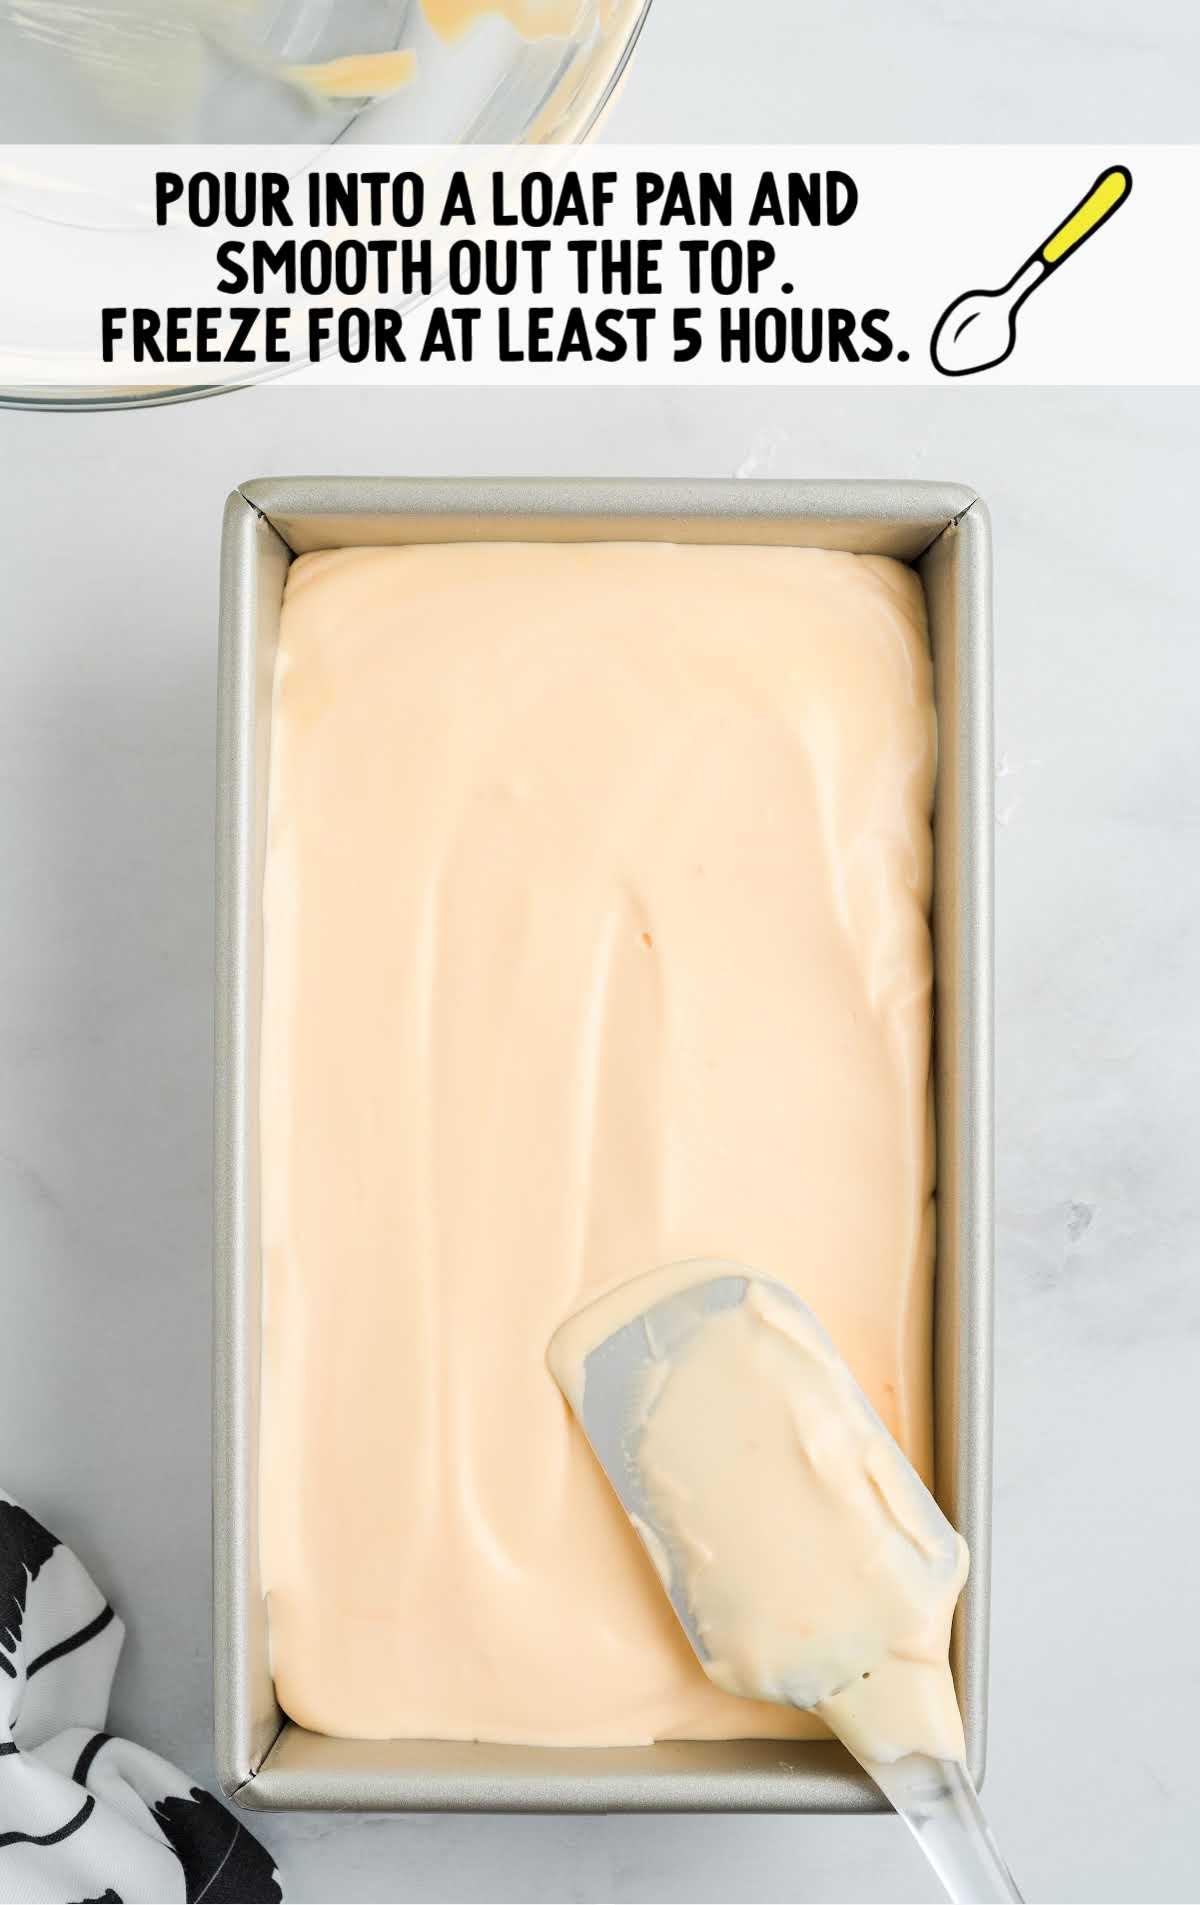  ice cream being smoothed out in a loaf pan